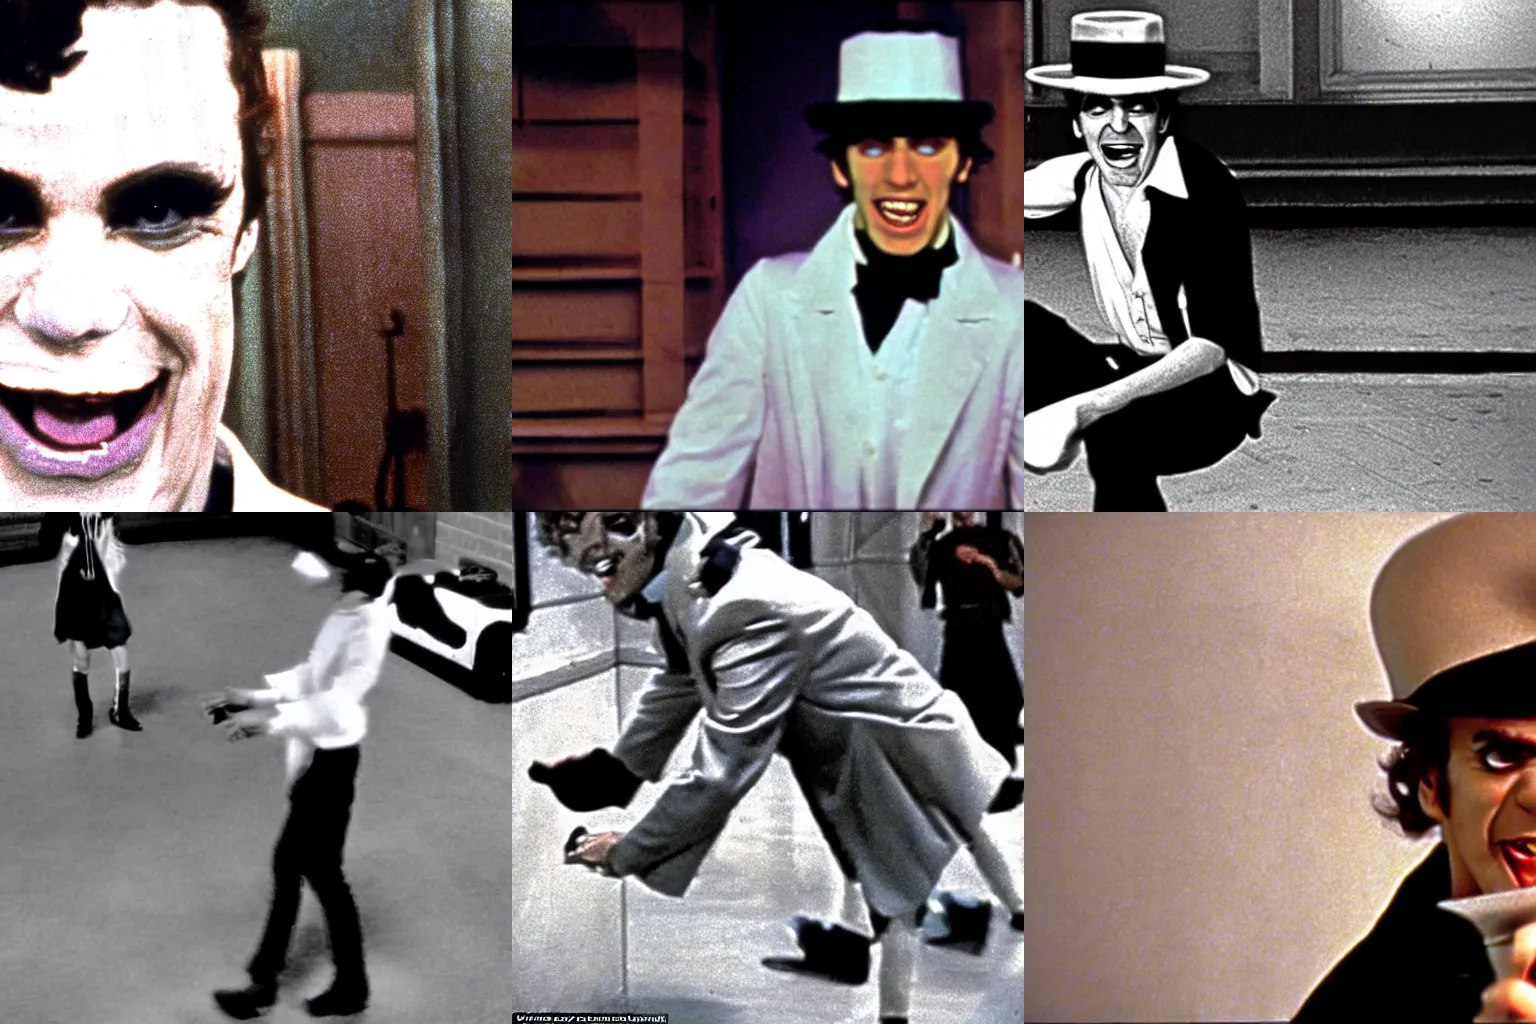 Prompt: Kramer as one of the droogs from the movie a clockwork orange laughing while kicking someone, grainy movie still